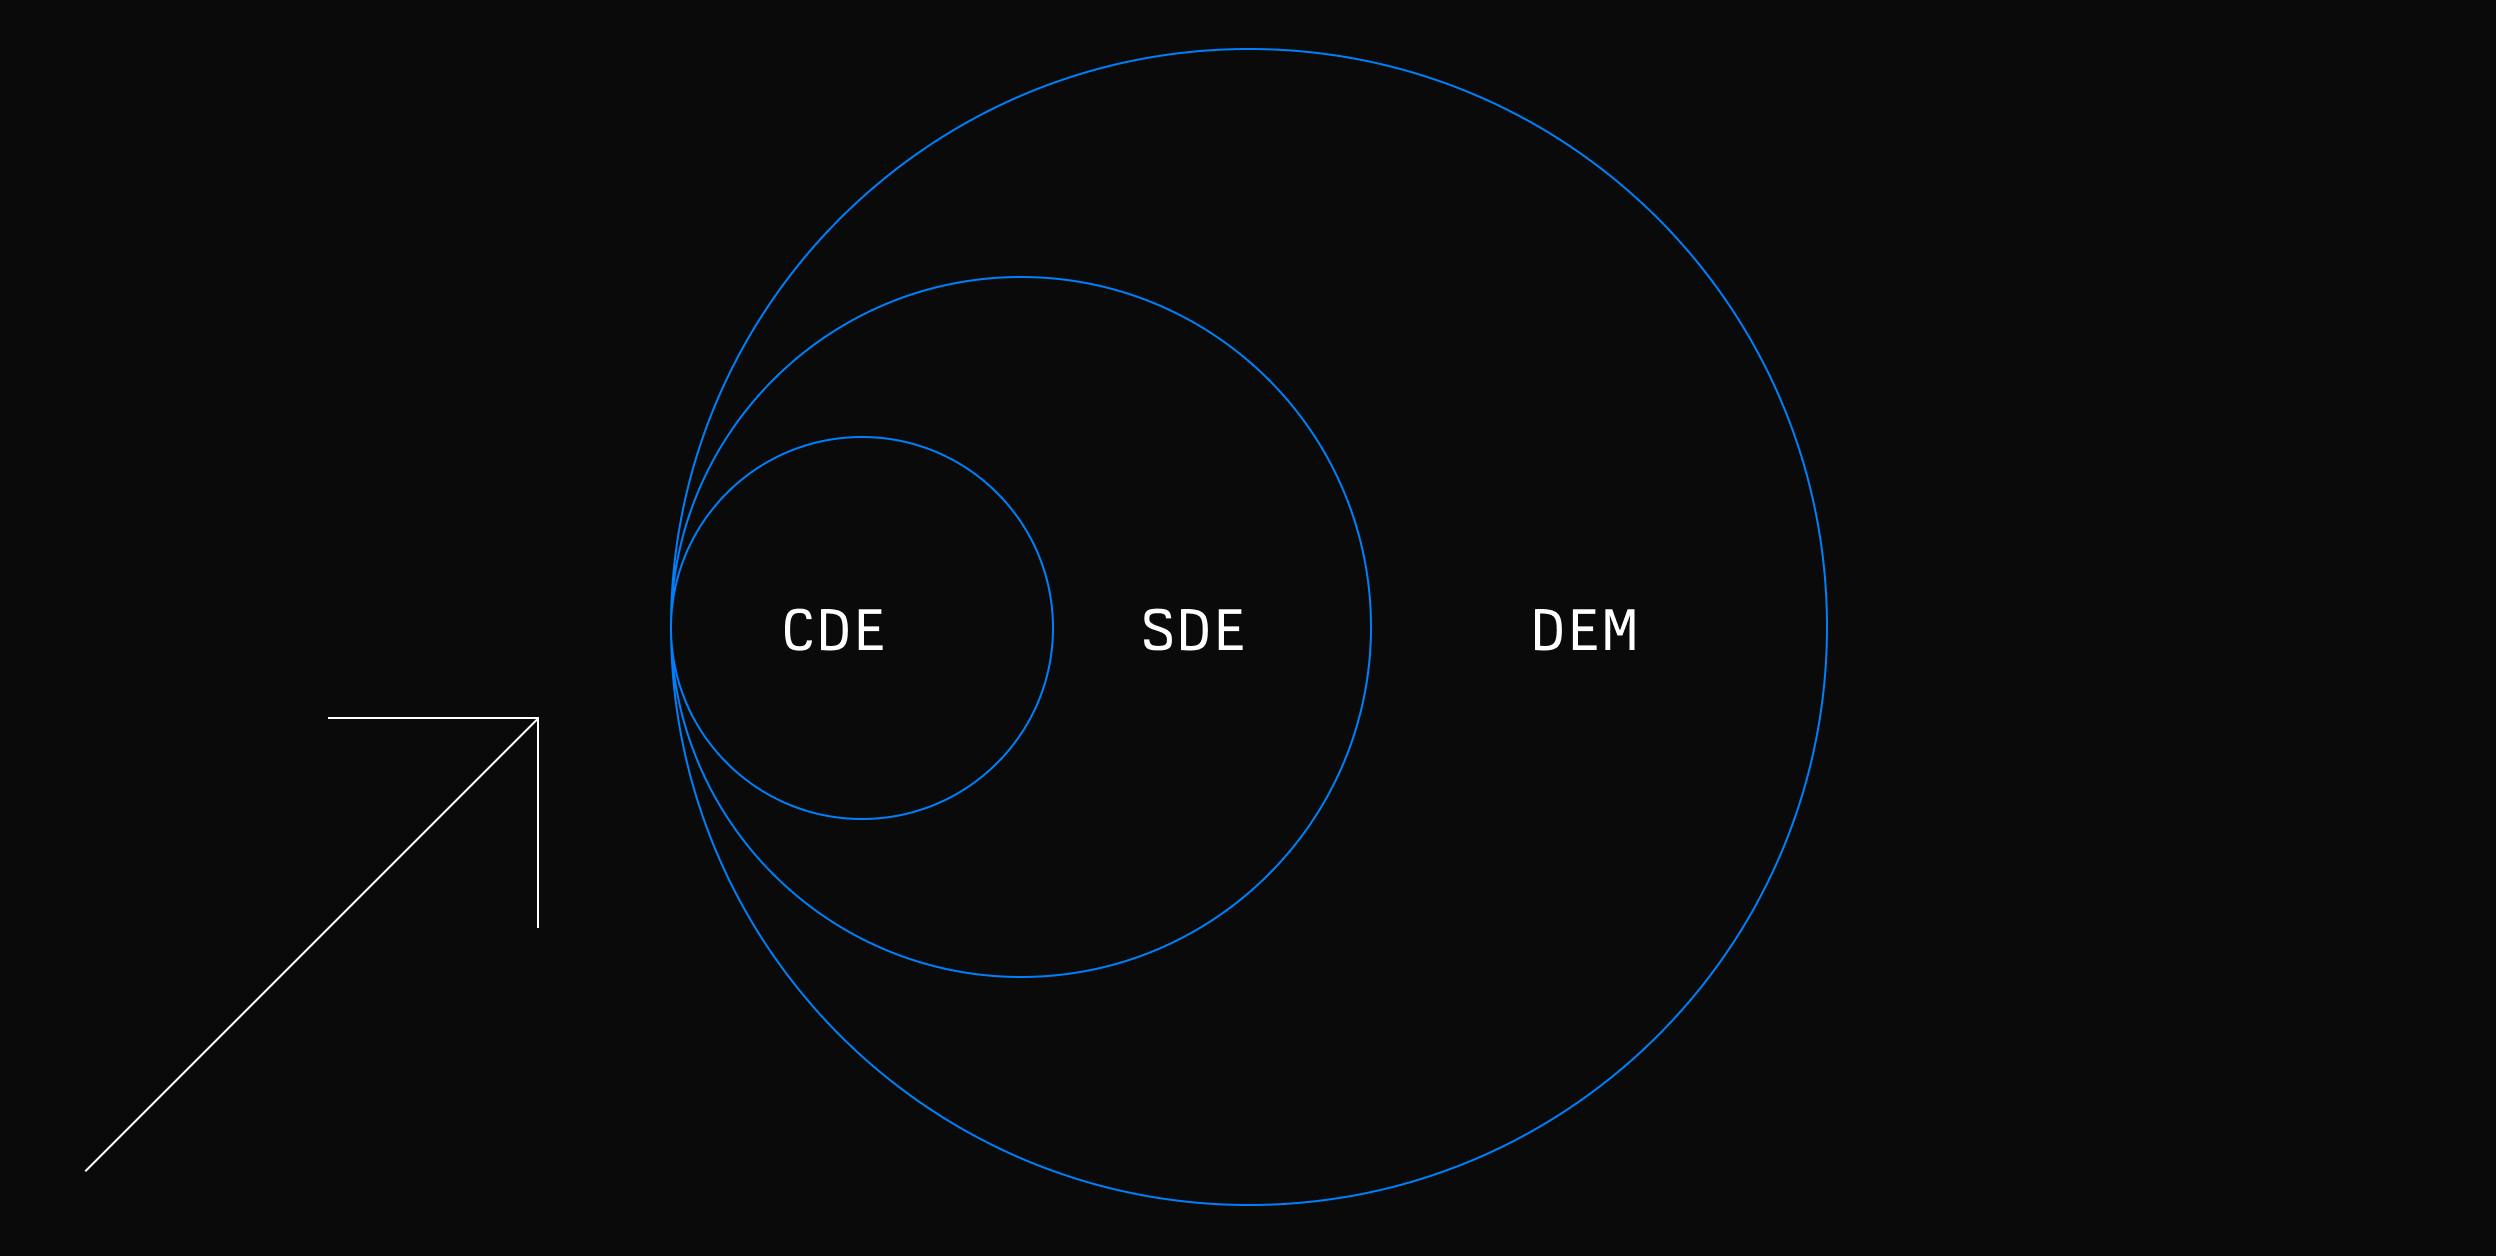 Relation between CDEs, SDEs and DEMs